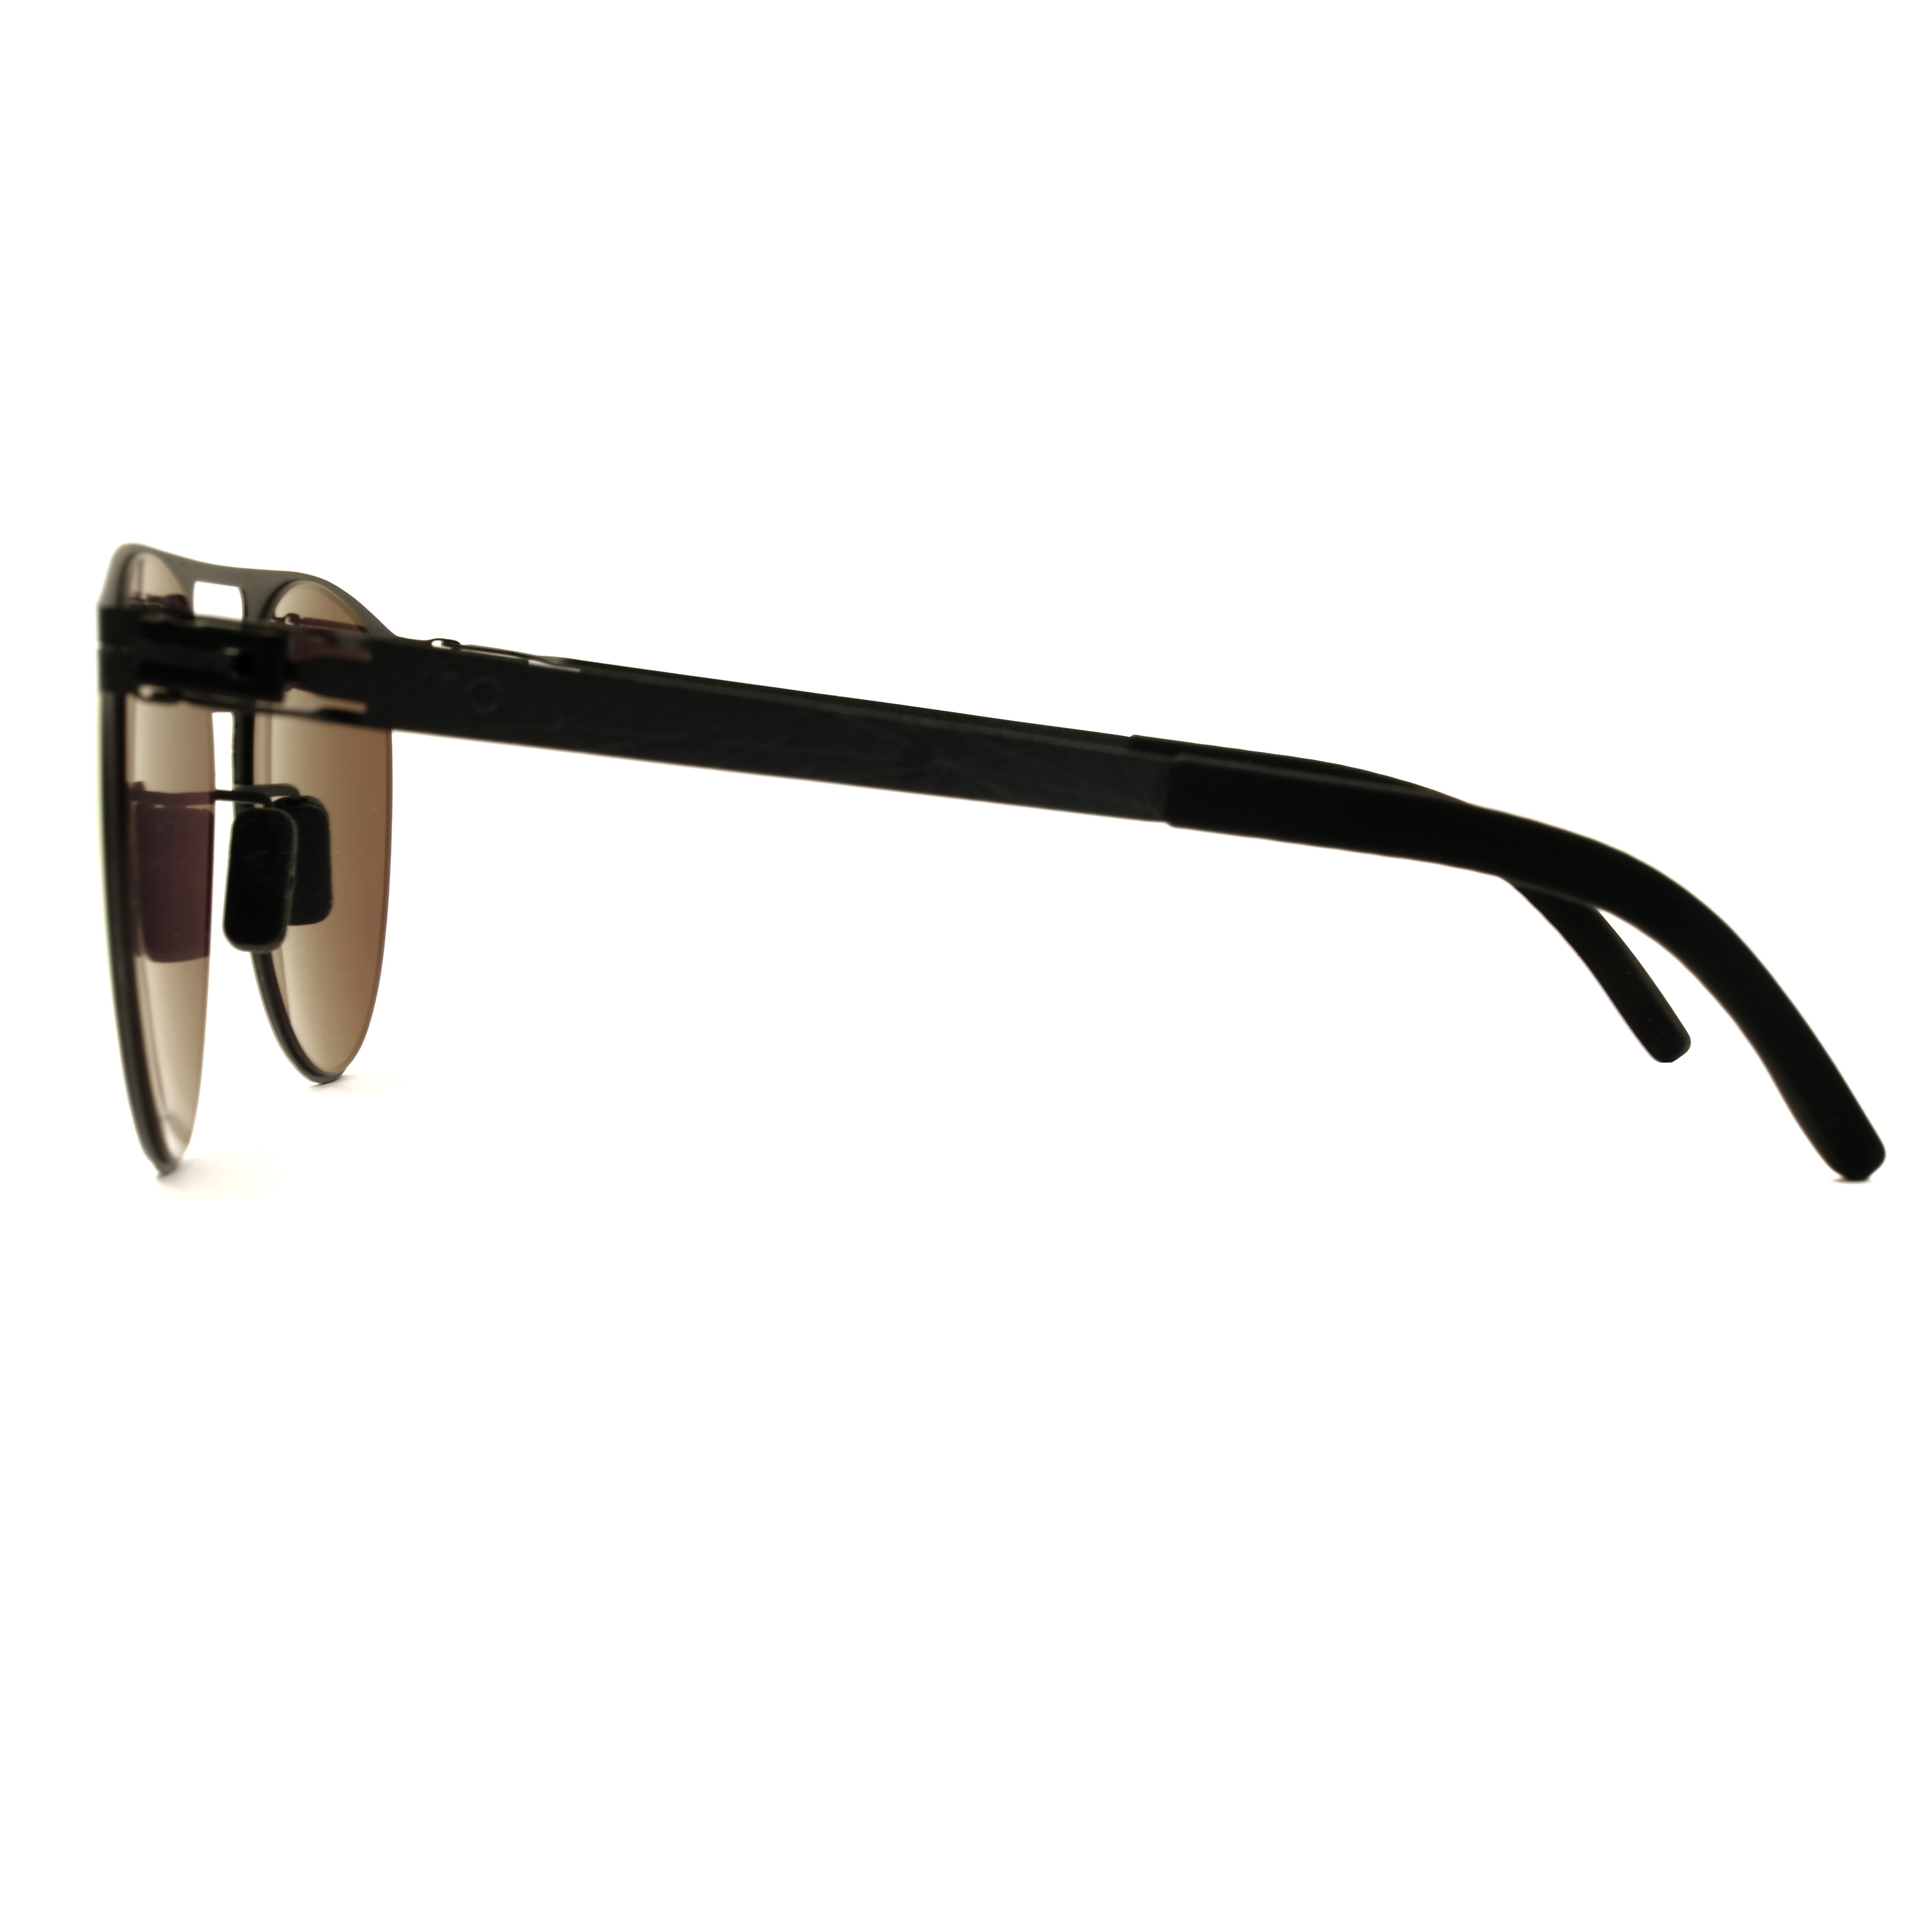 Sunglasses Mens River Online Eyeglass Companies Spectacle Manufacturers